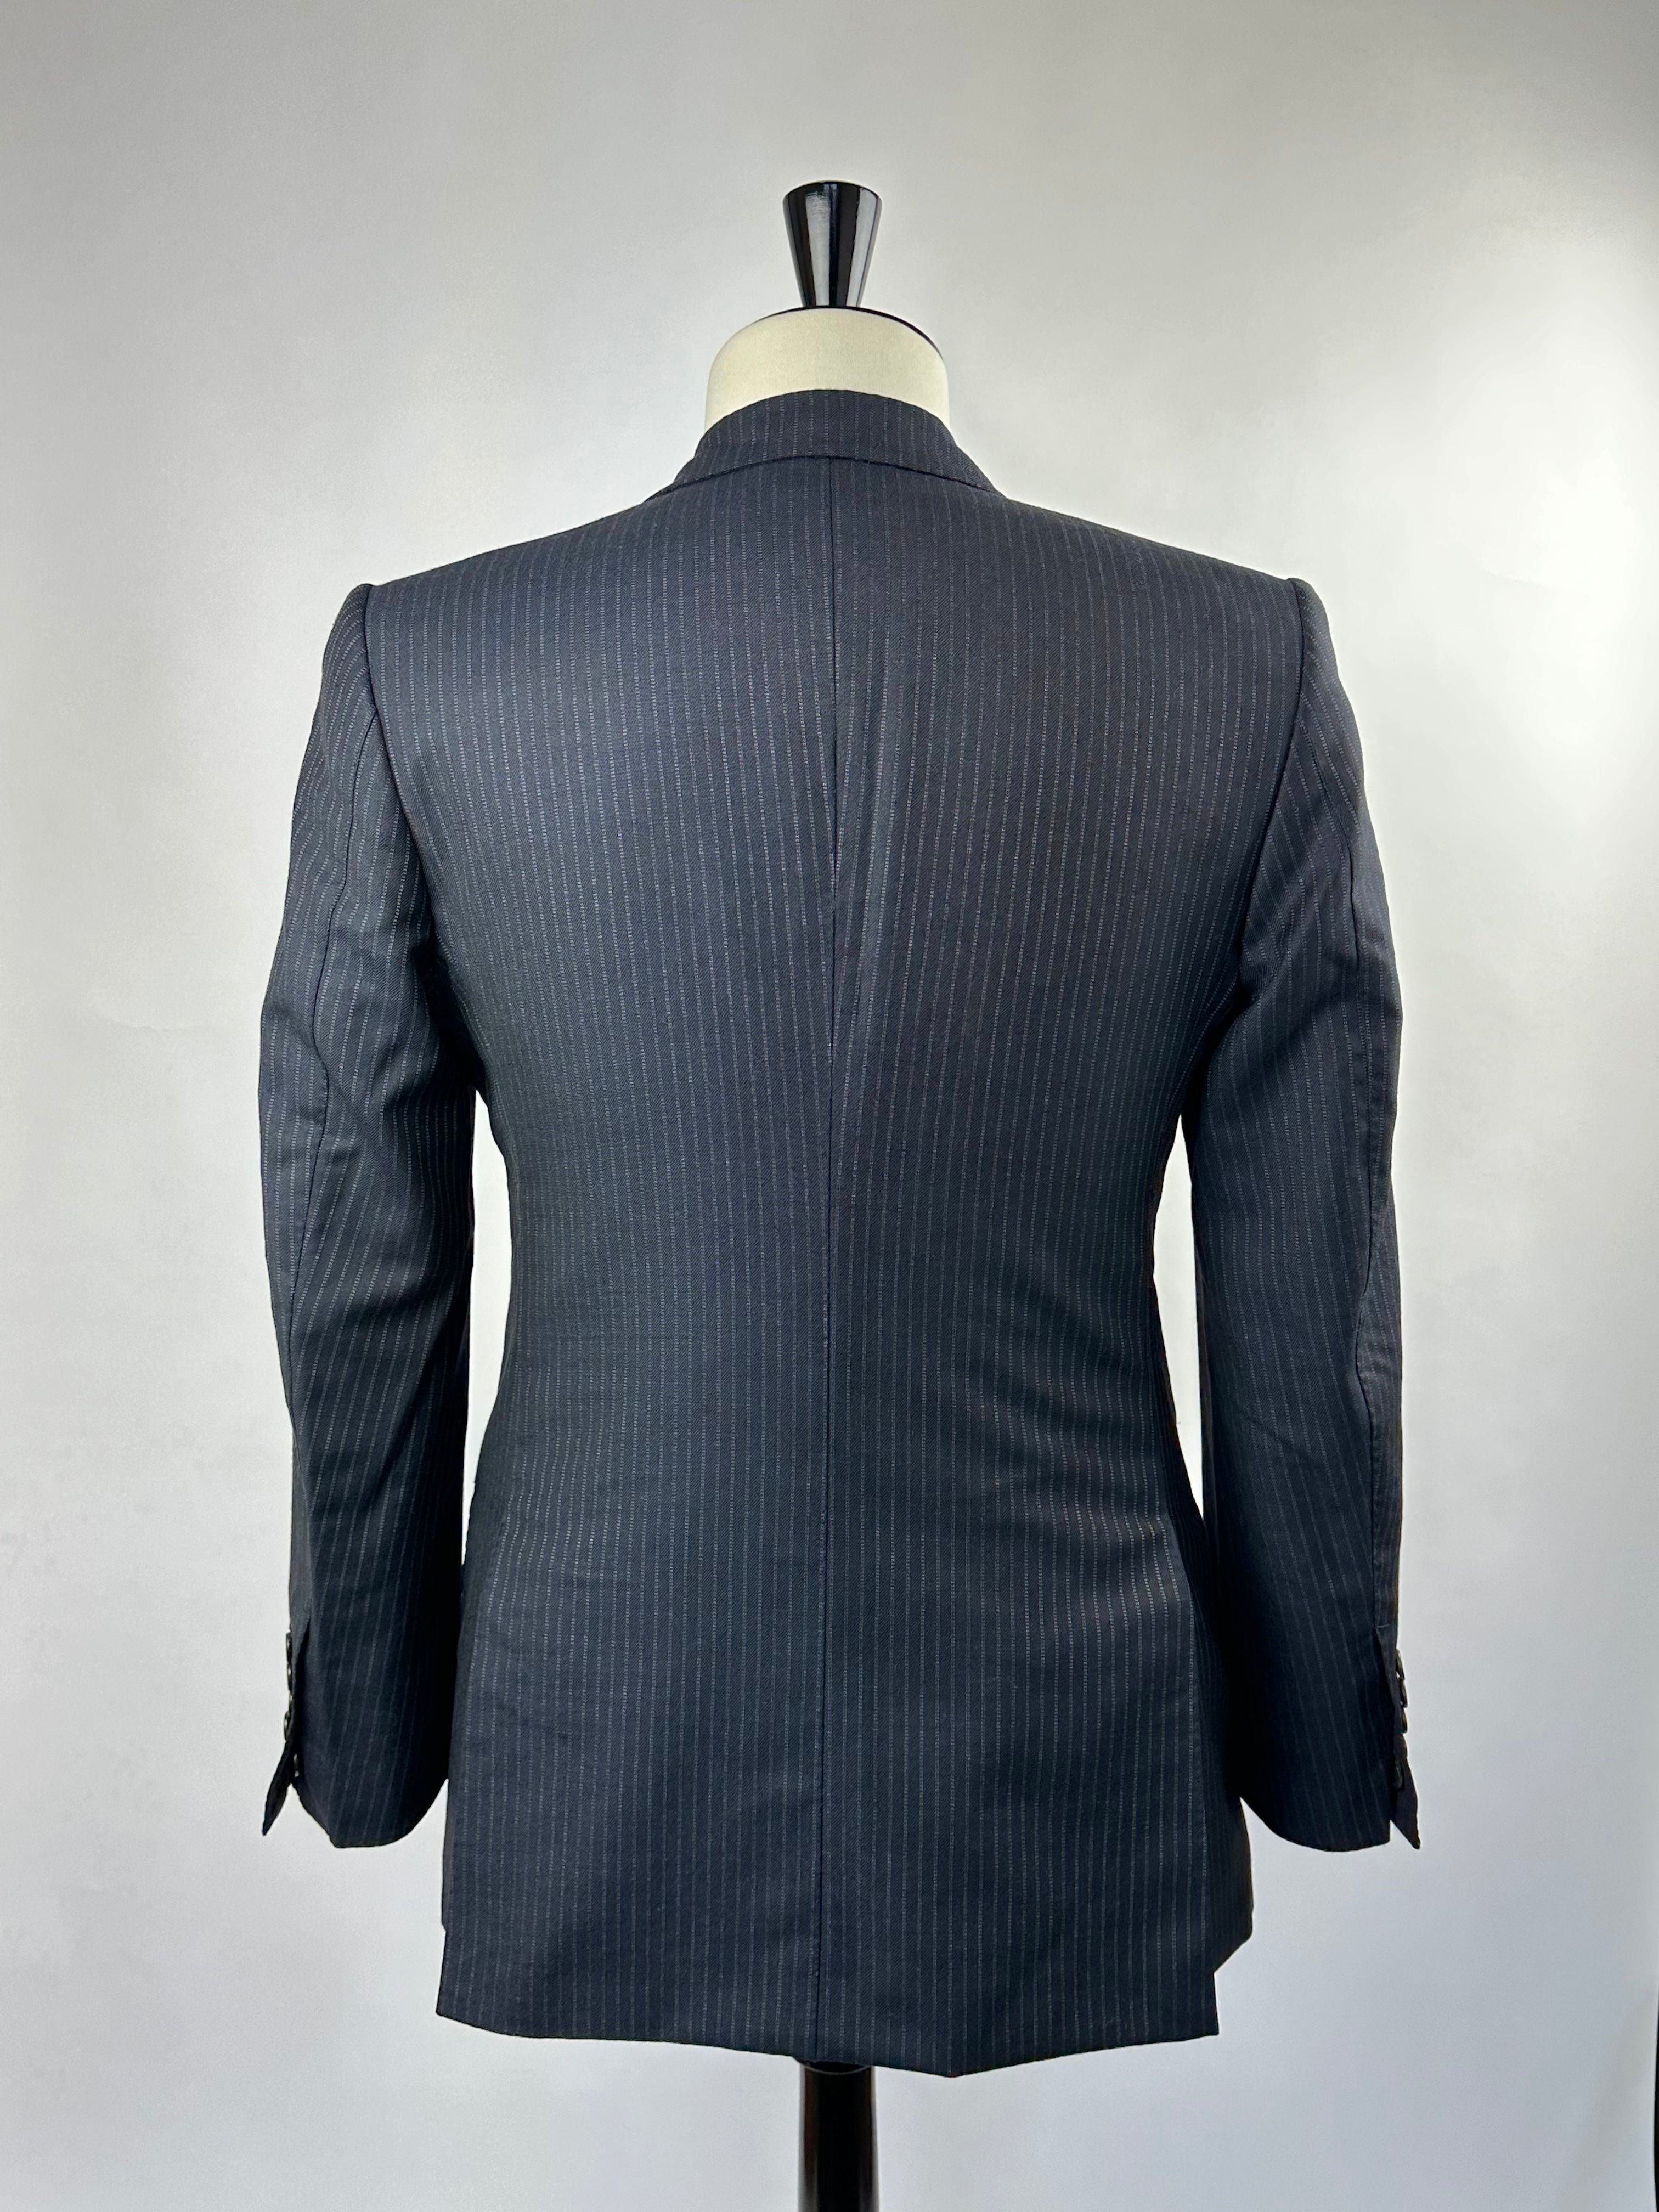 Tom Ford Pinstripe Suit